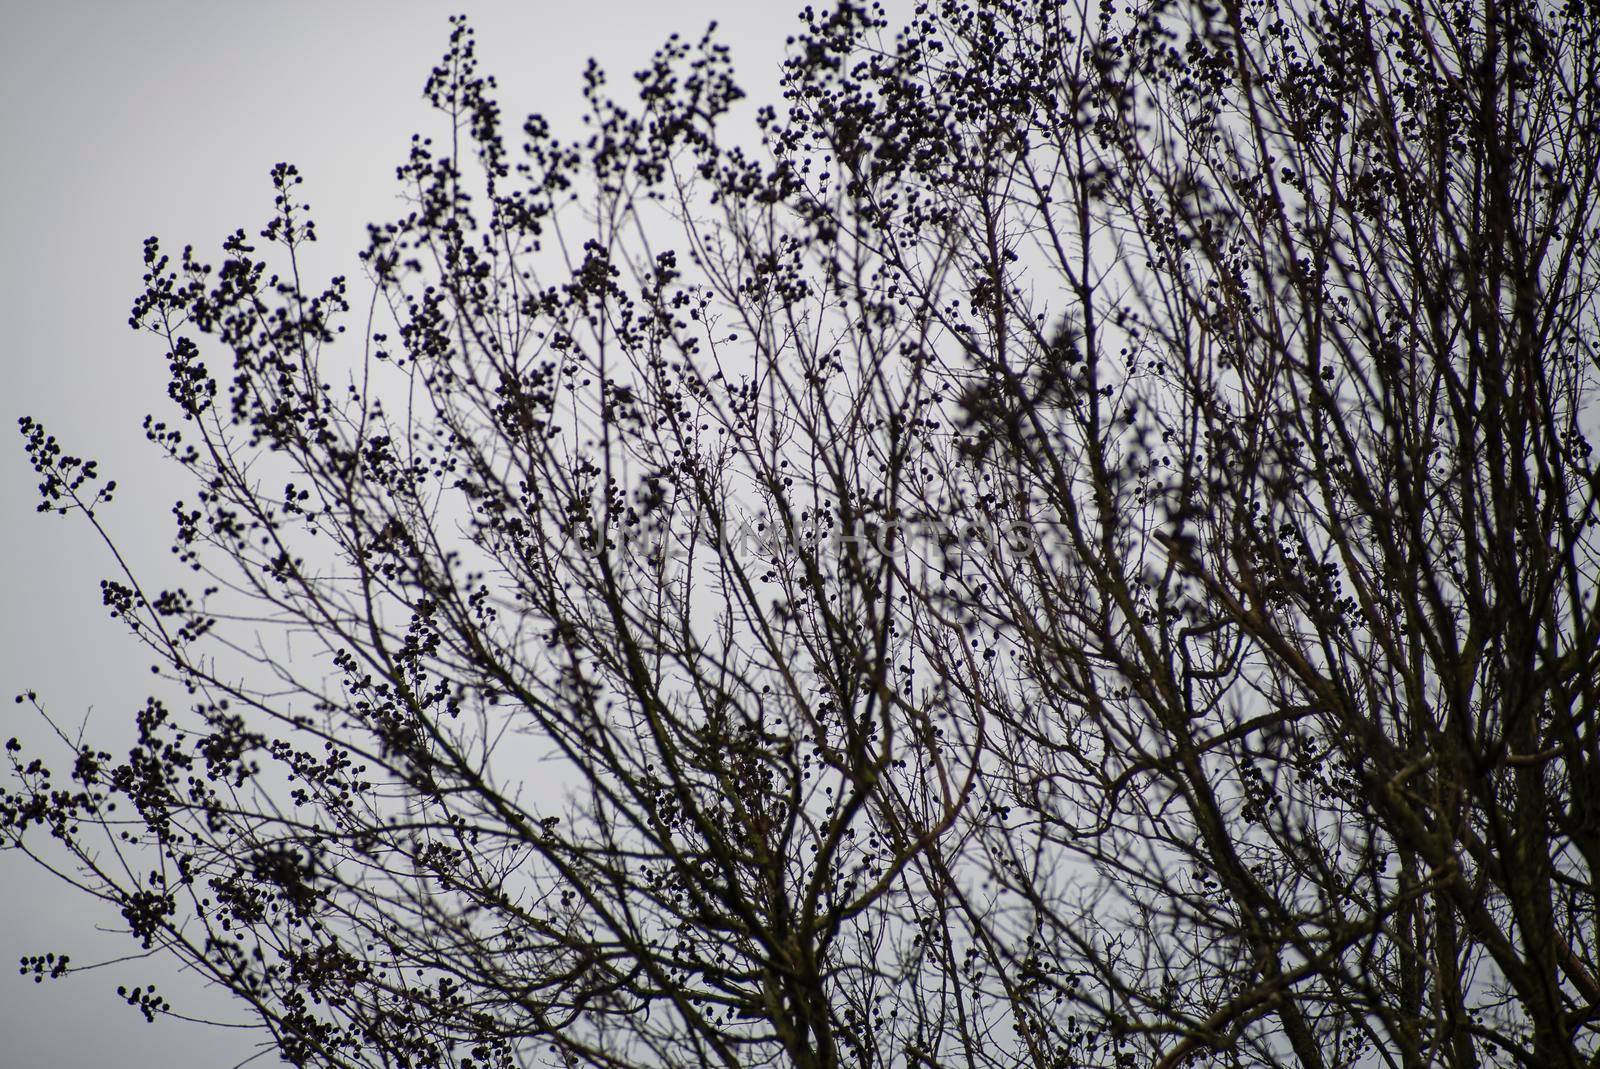 Detail of bare branches in winter by pippocarlot